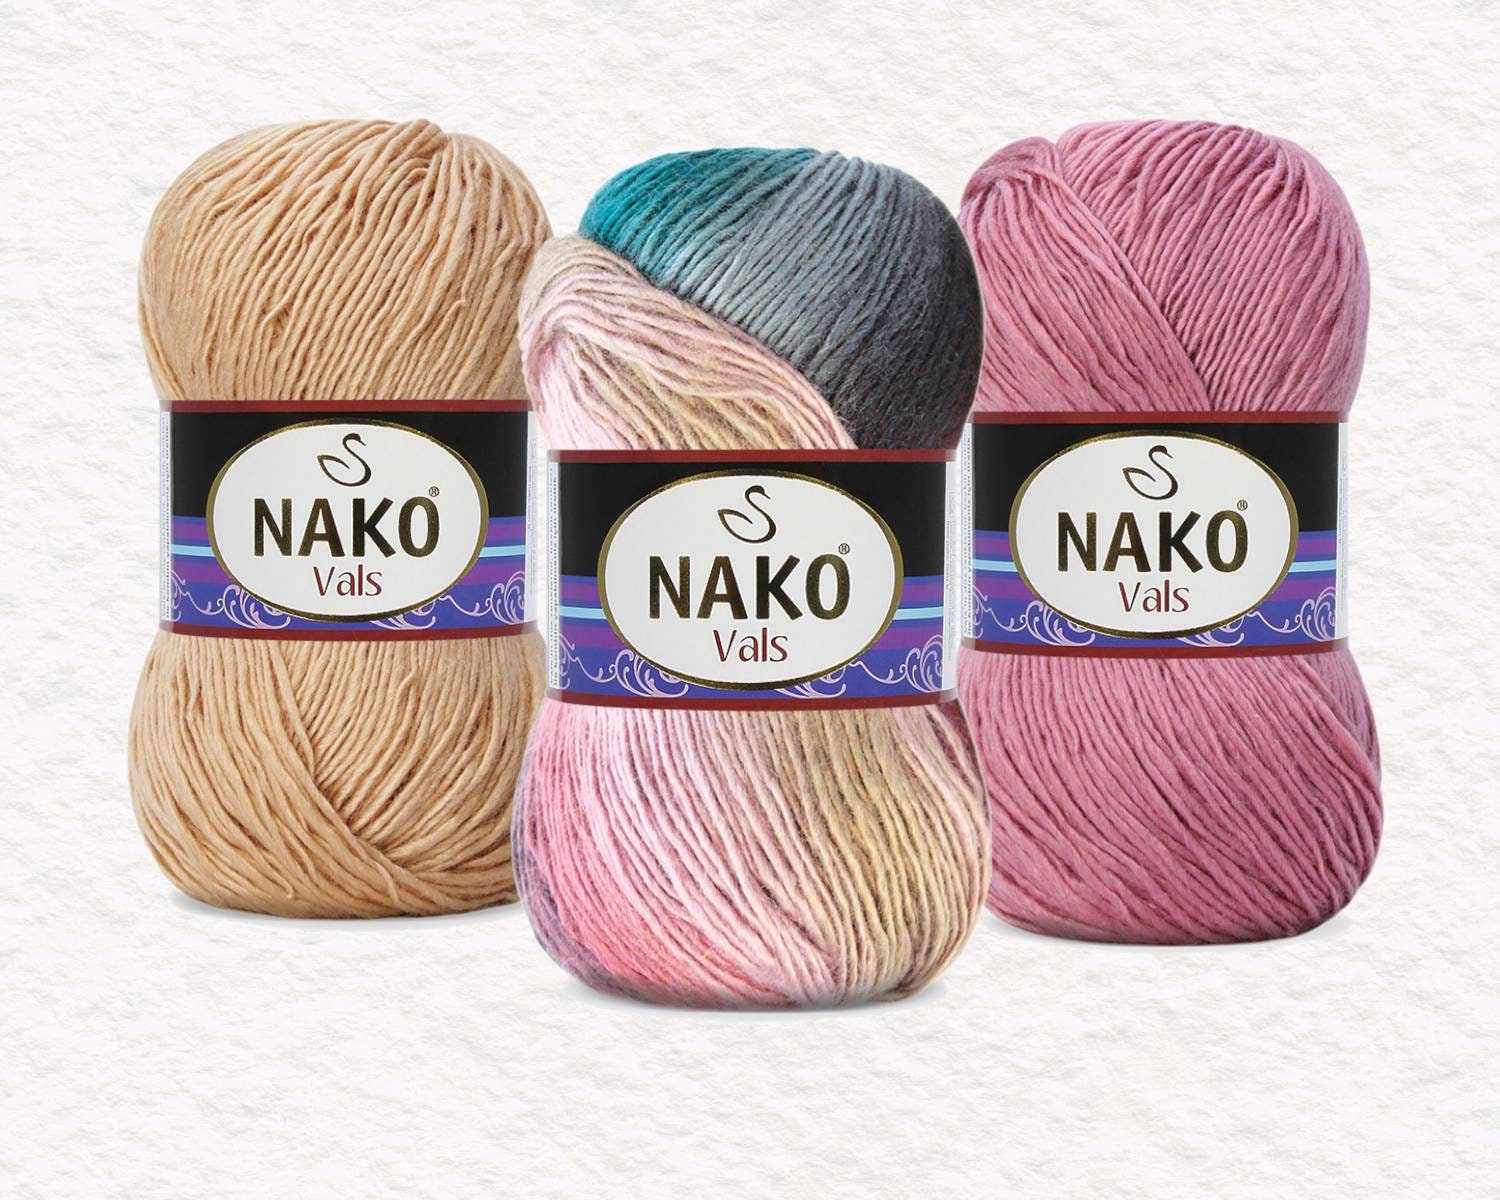 500g Colorful Knot Yarn for Hand Knitting Mohair Yarn Thick Crochet Yarn  Sweater Hat DIY Line Threads